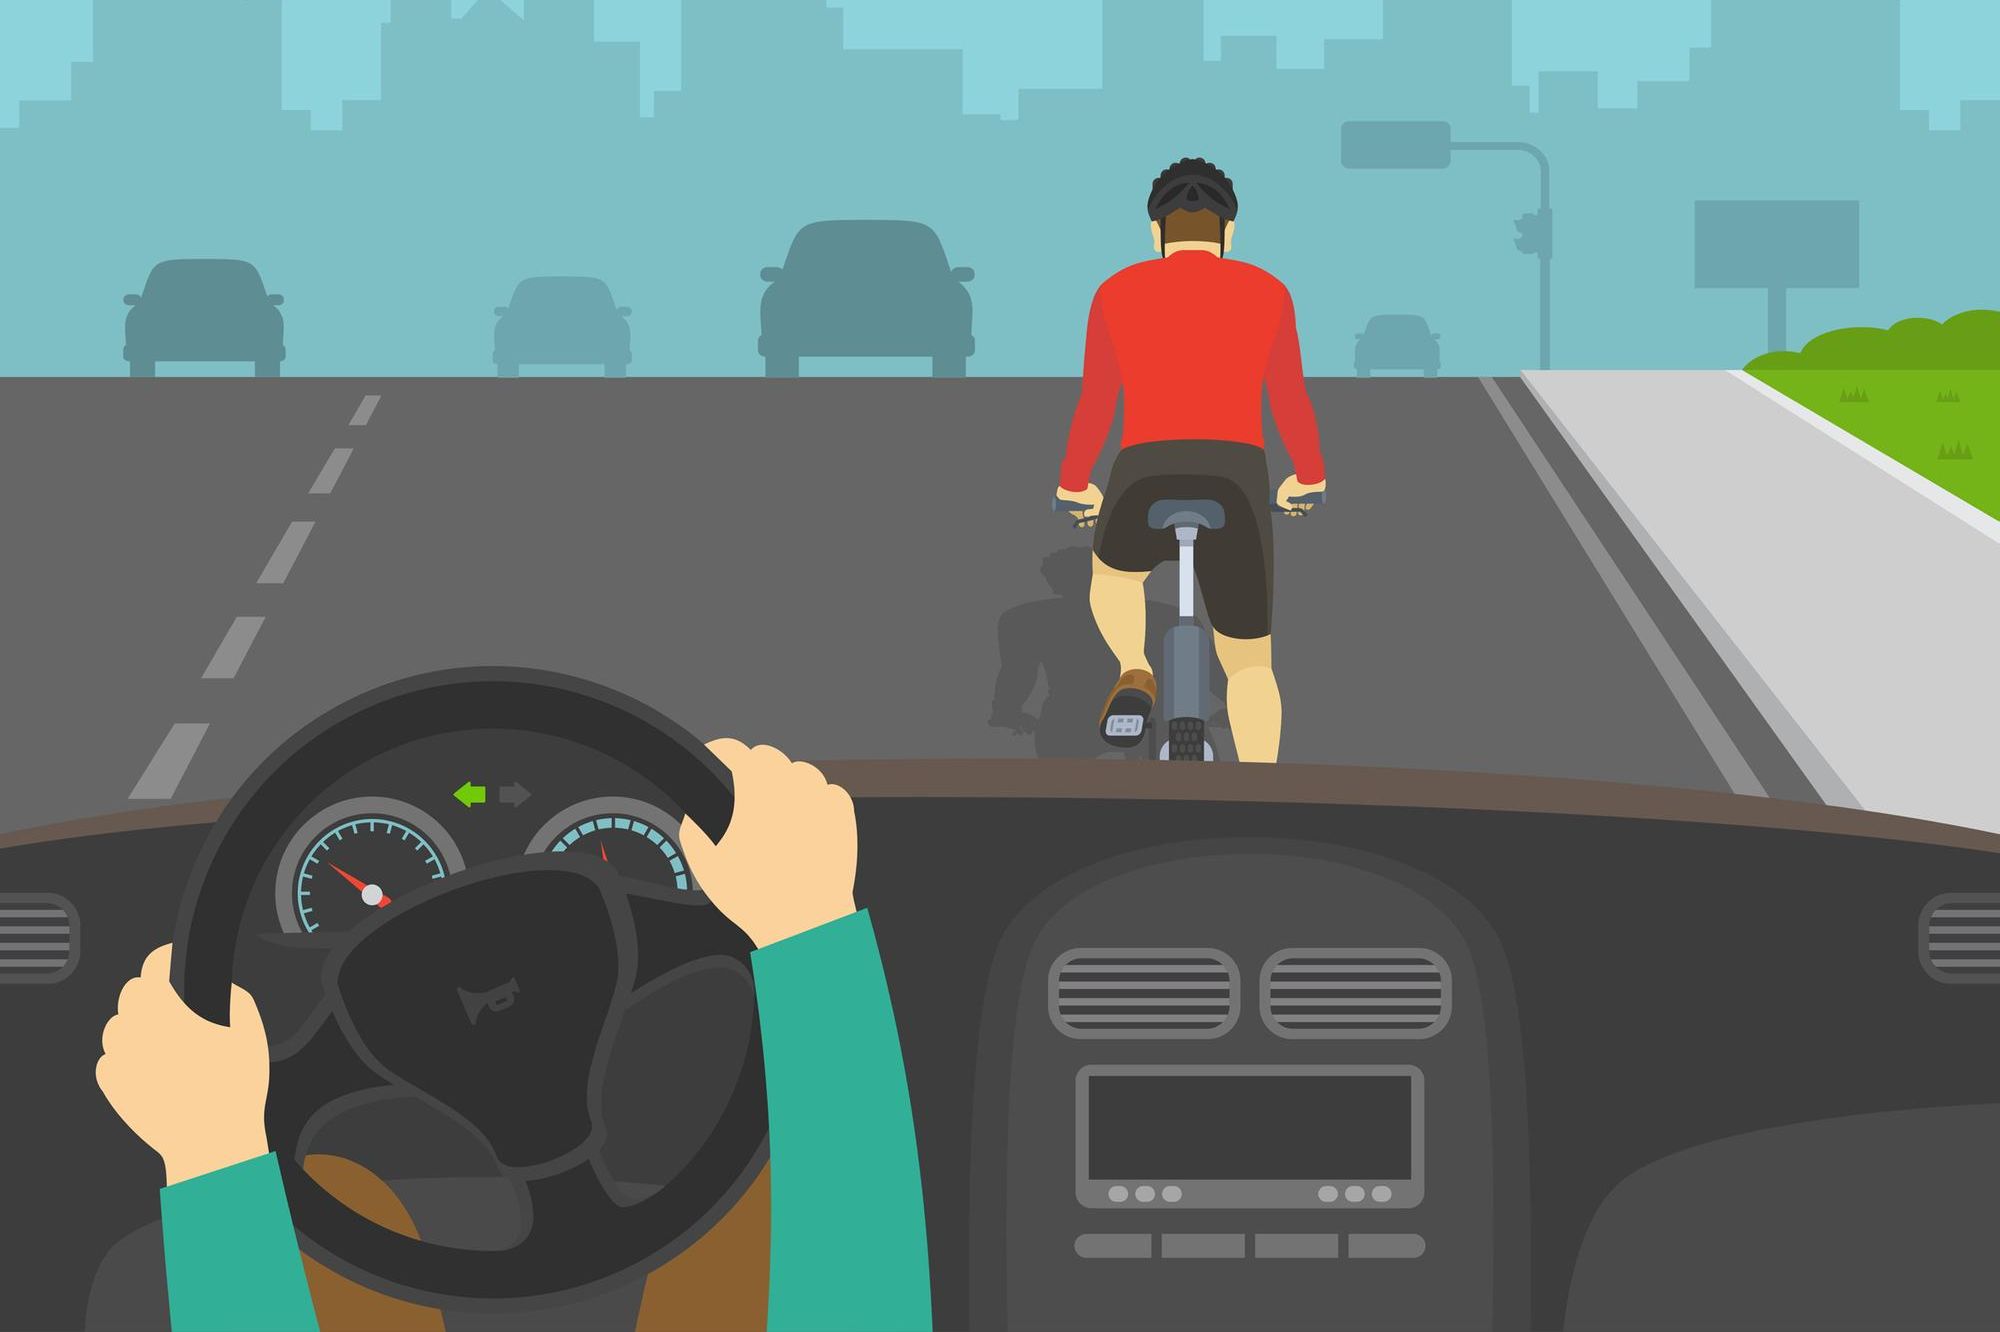 Auto advice: Here’s what drivers can do to keep cyclists safer on our roads